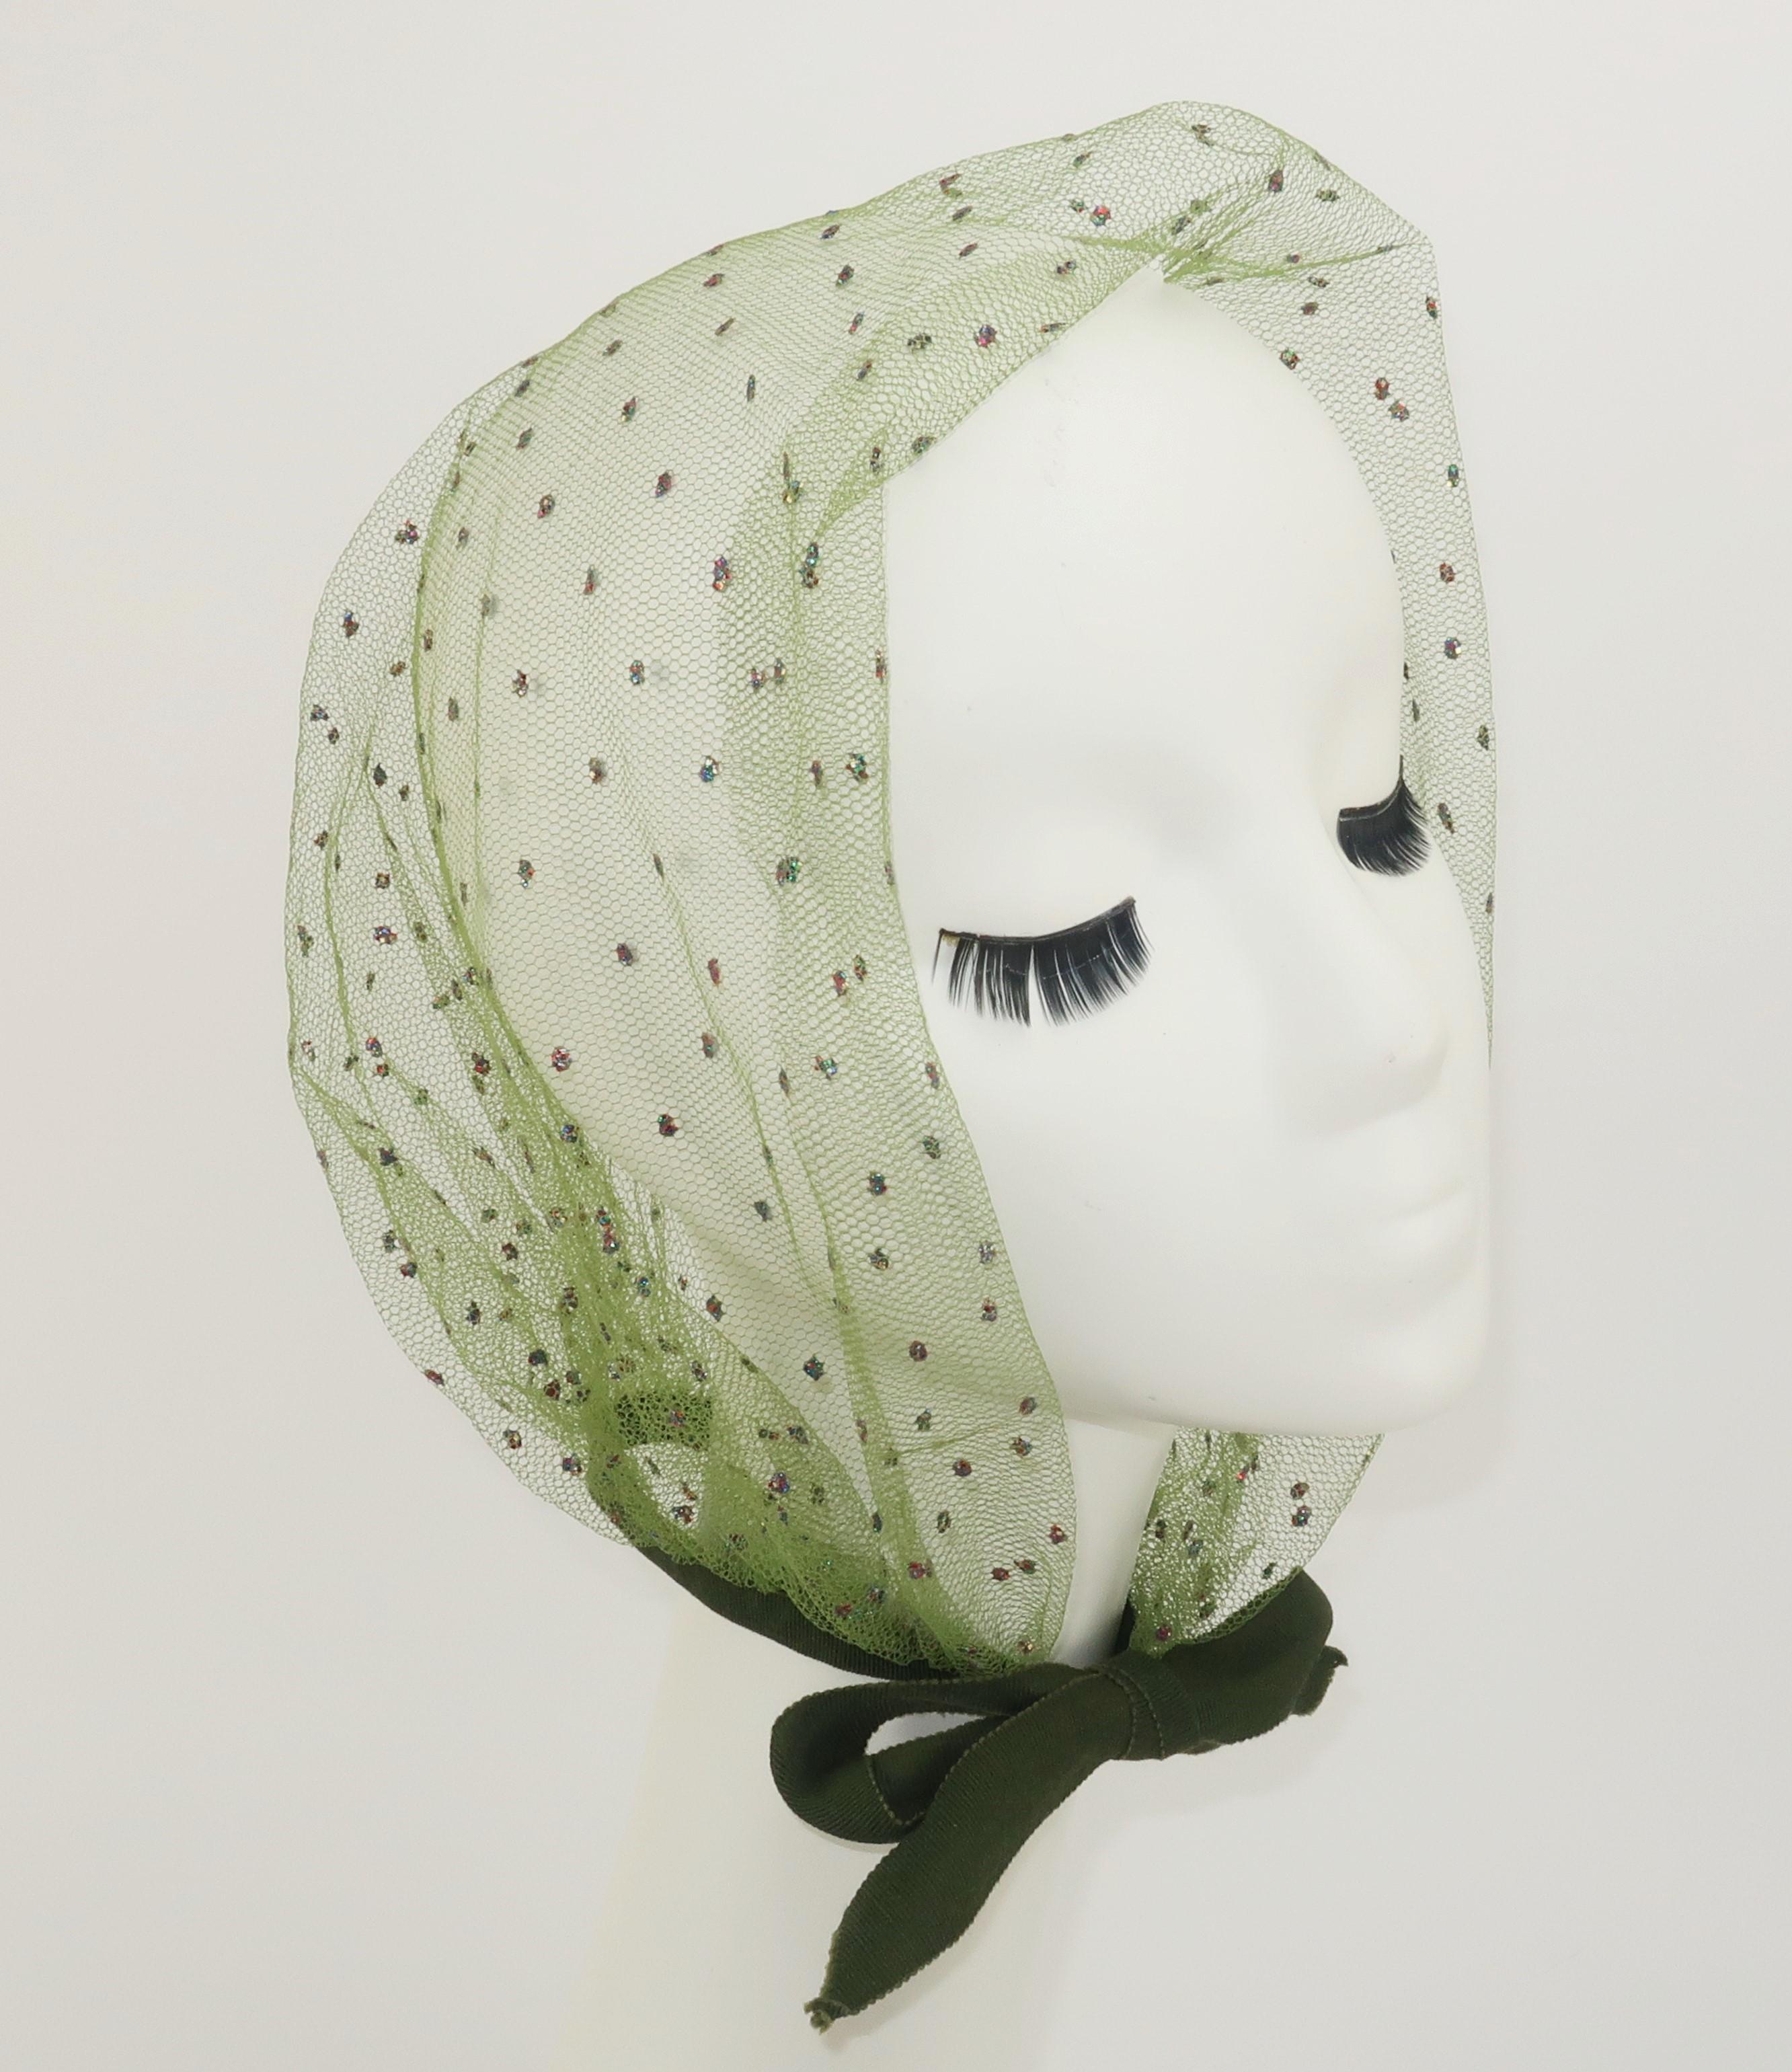 1950's green net head scarf accented with dots of multi color glitter adding a bit of glam to a practical topper that will keep your hair in place when cruising in a convertible ... or anytime the wind threatens to rearrange your locks.  The olive